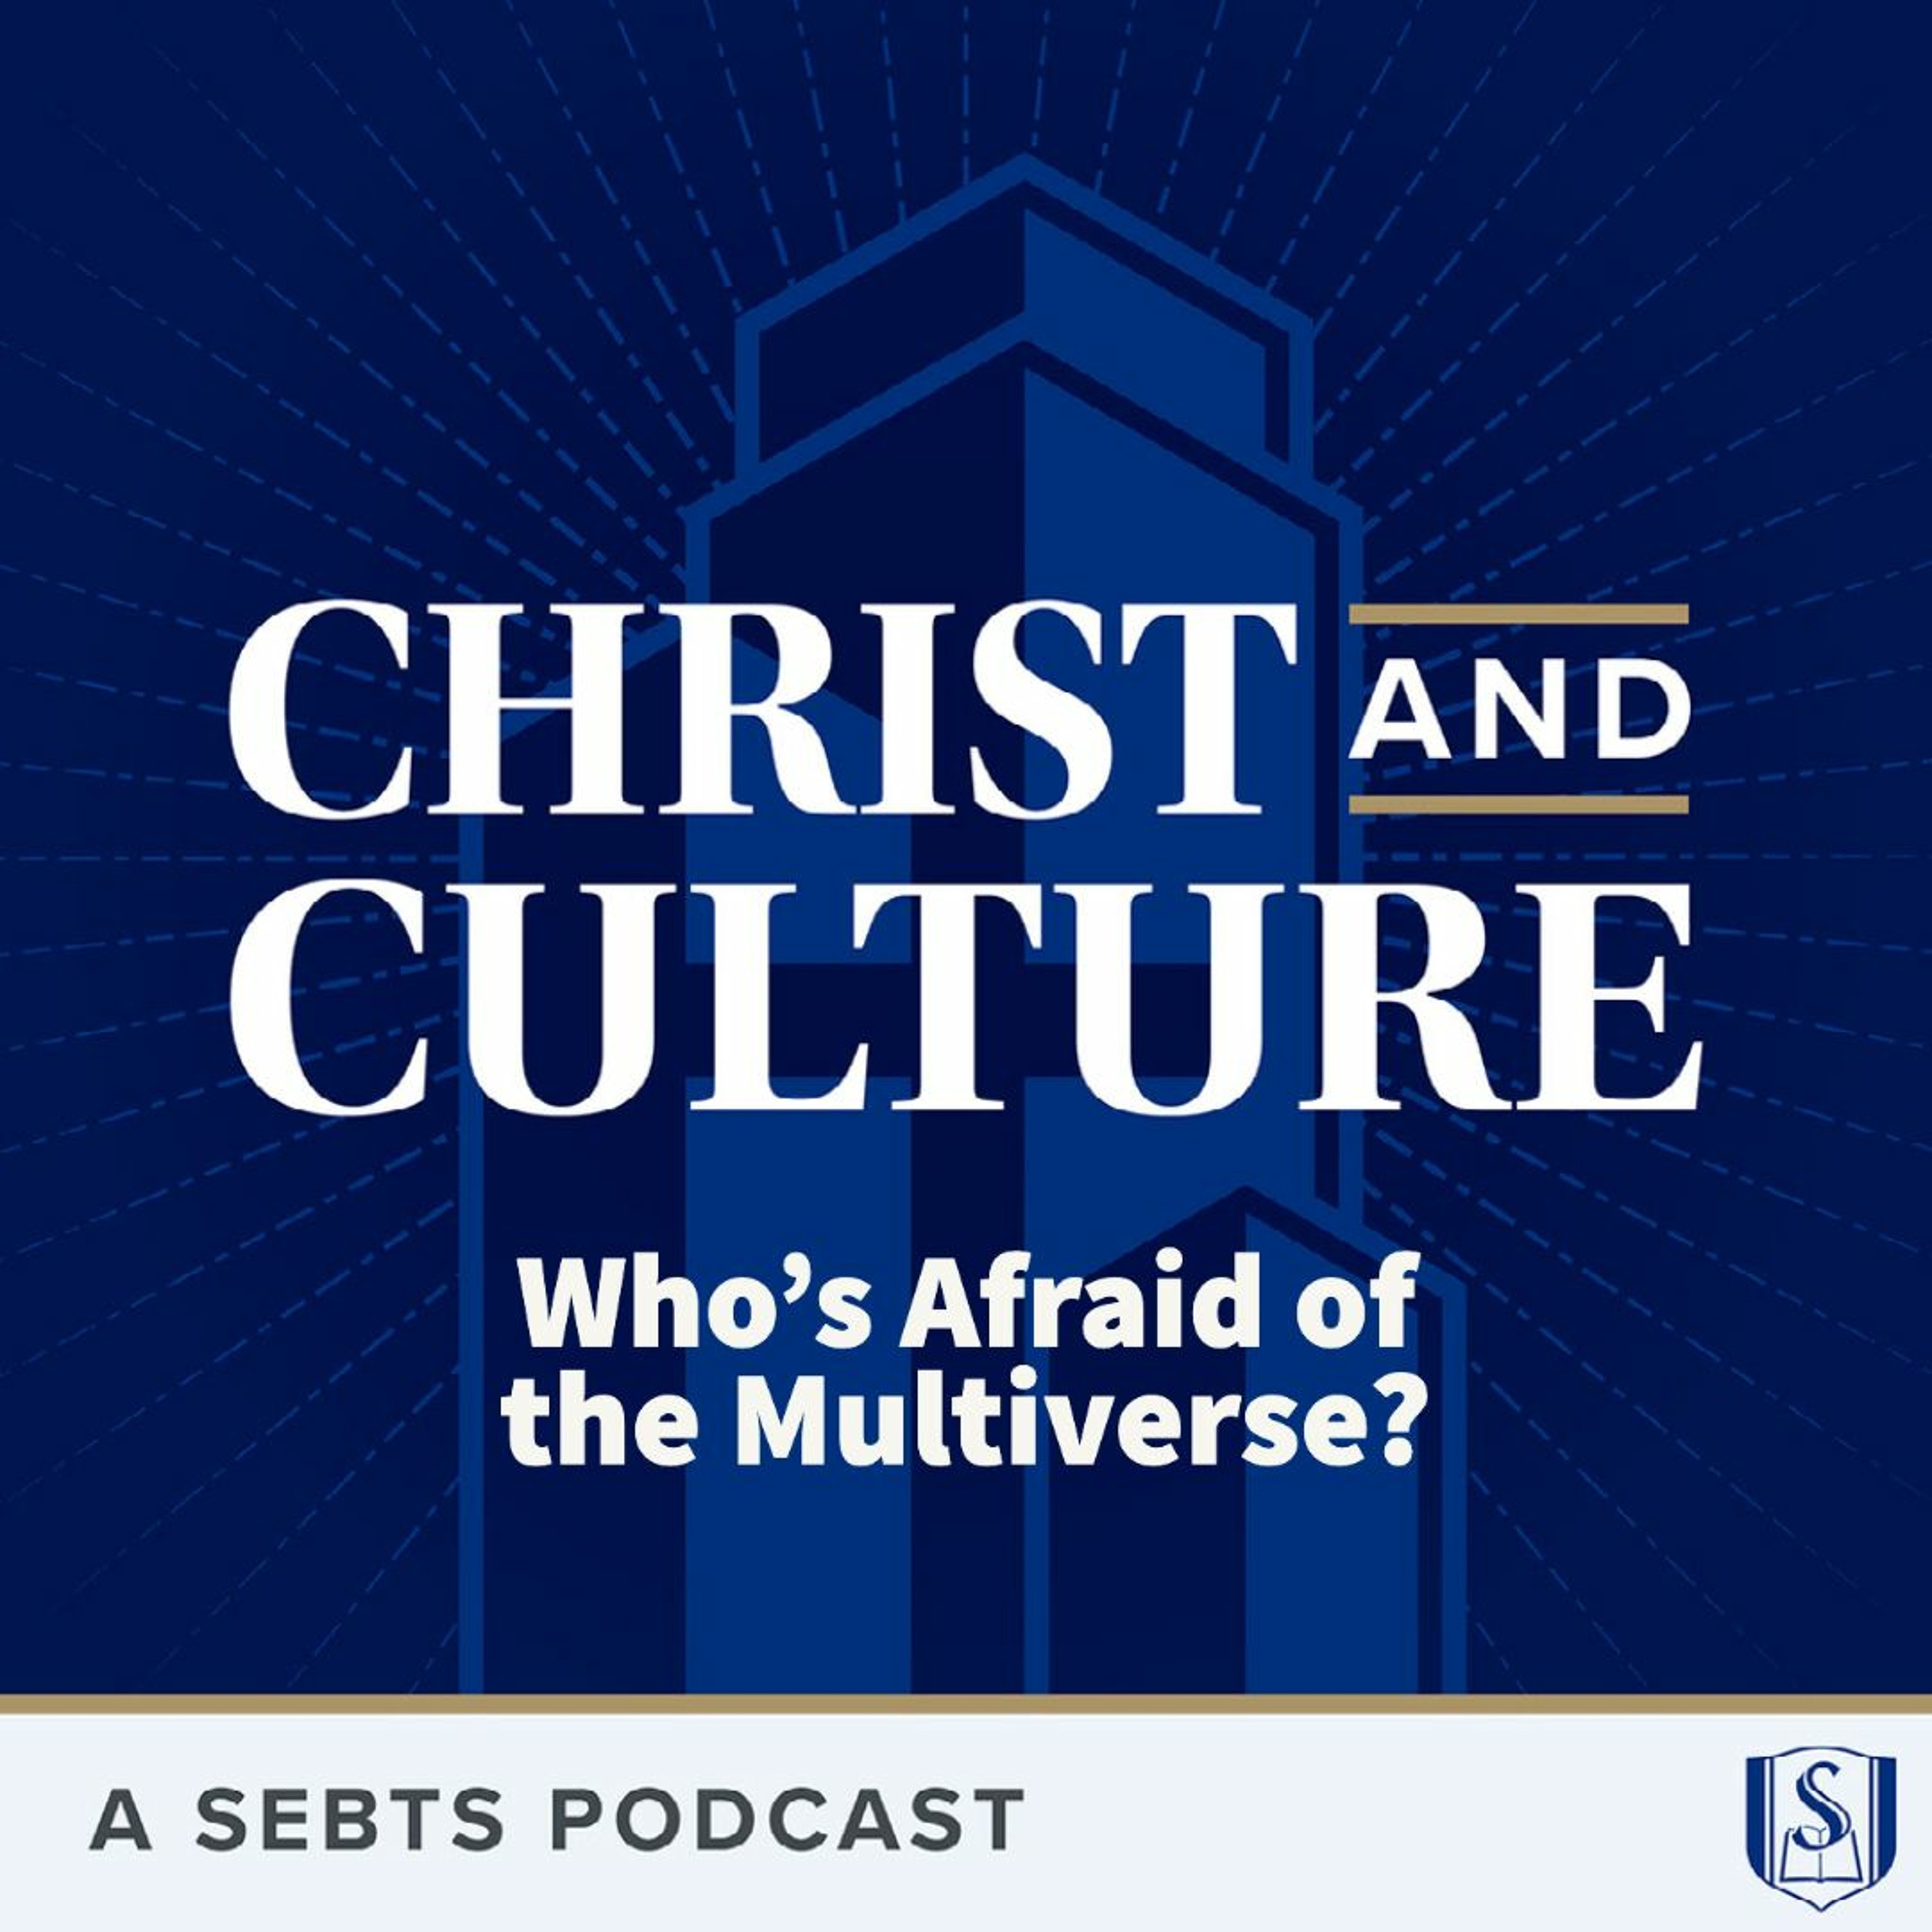 Jeff Zweerink: Who's Afraid of the Multiverse? - EP 102